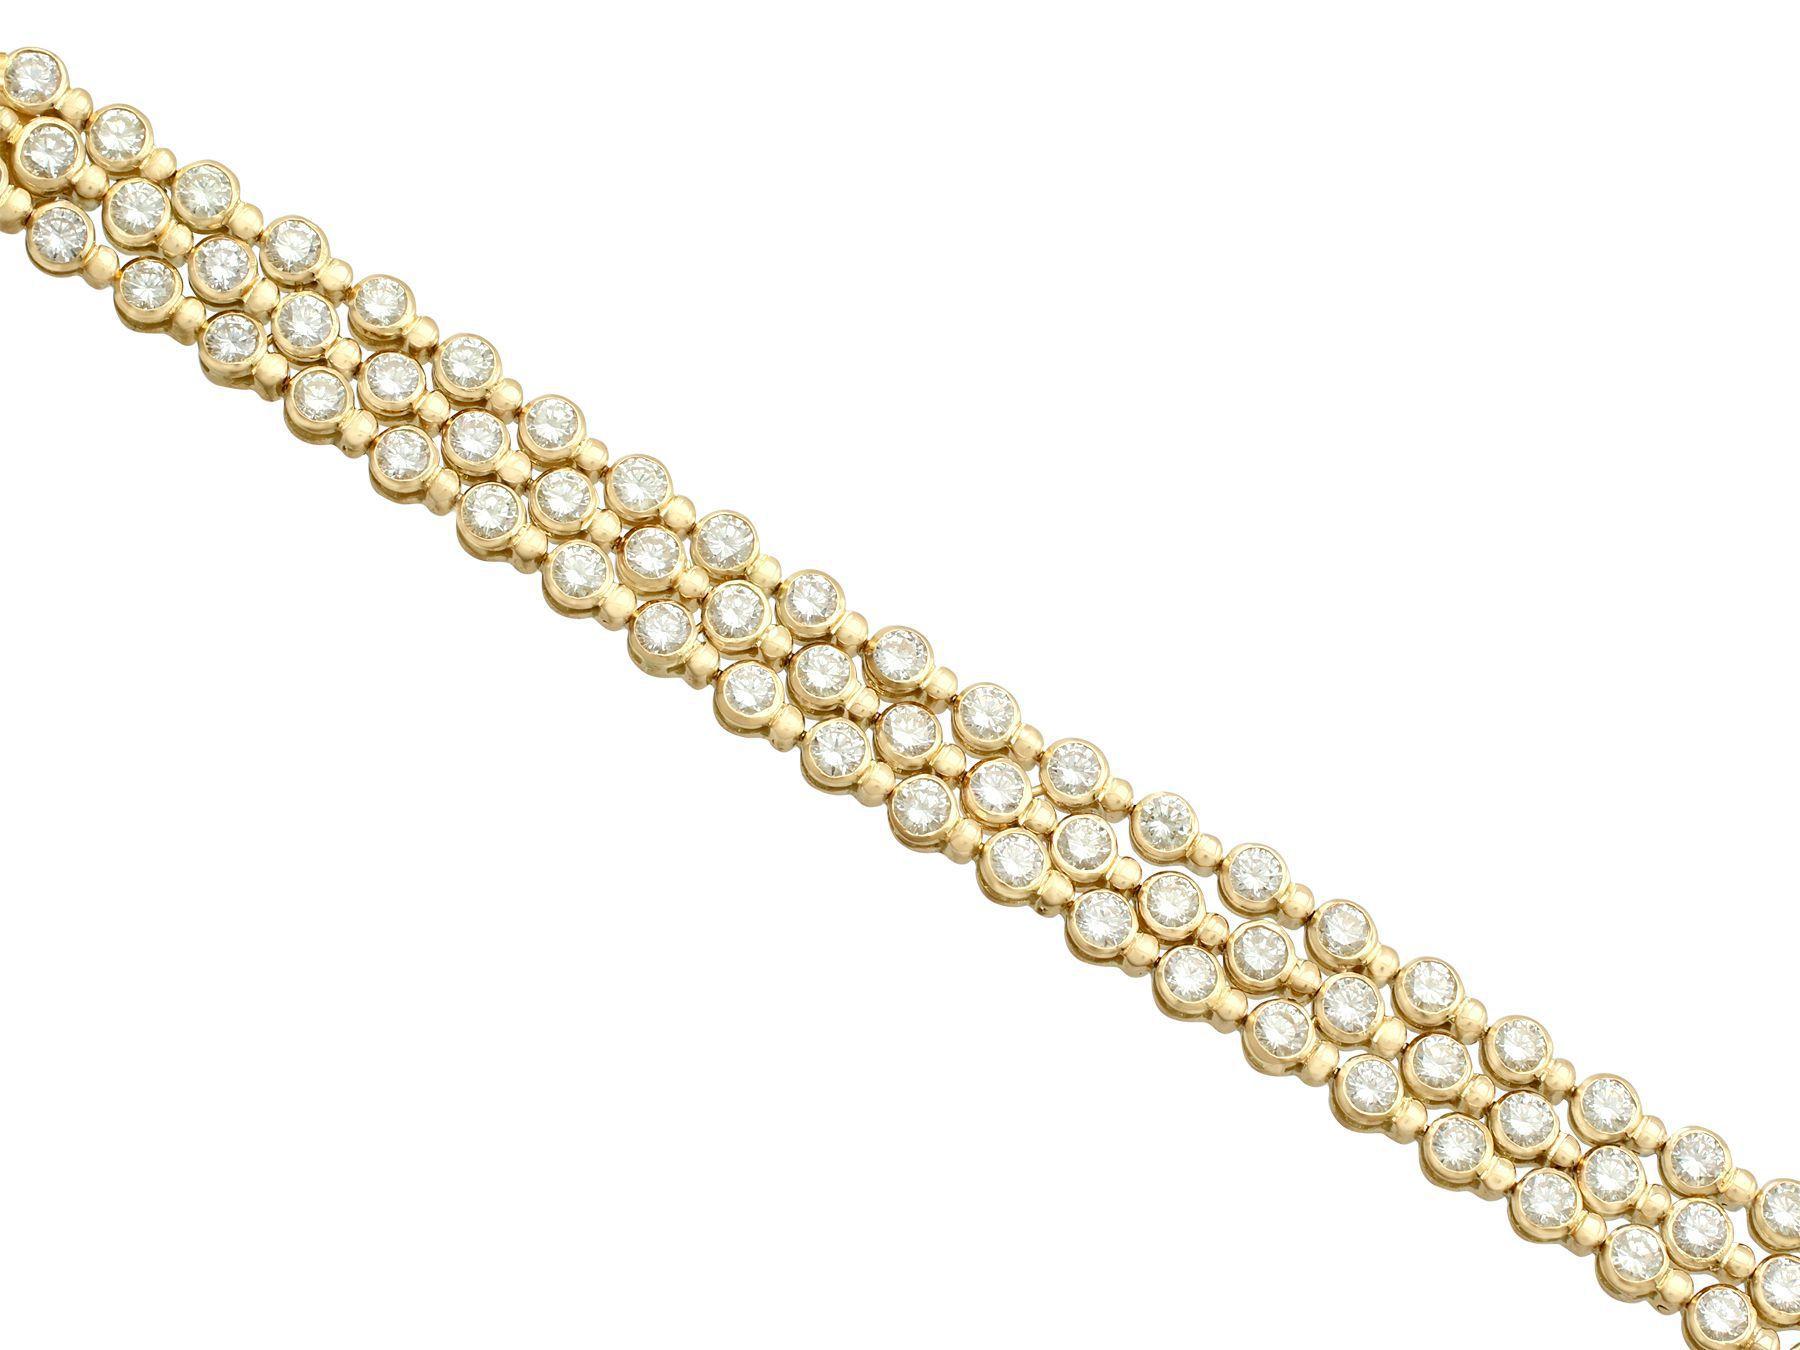 1990s French 12.96 Carat Diamond and Yellow Gold Bracelet In Excellent Condition For Sale In Jesmond, Newcastle Upon Tyne